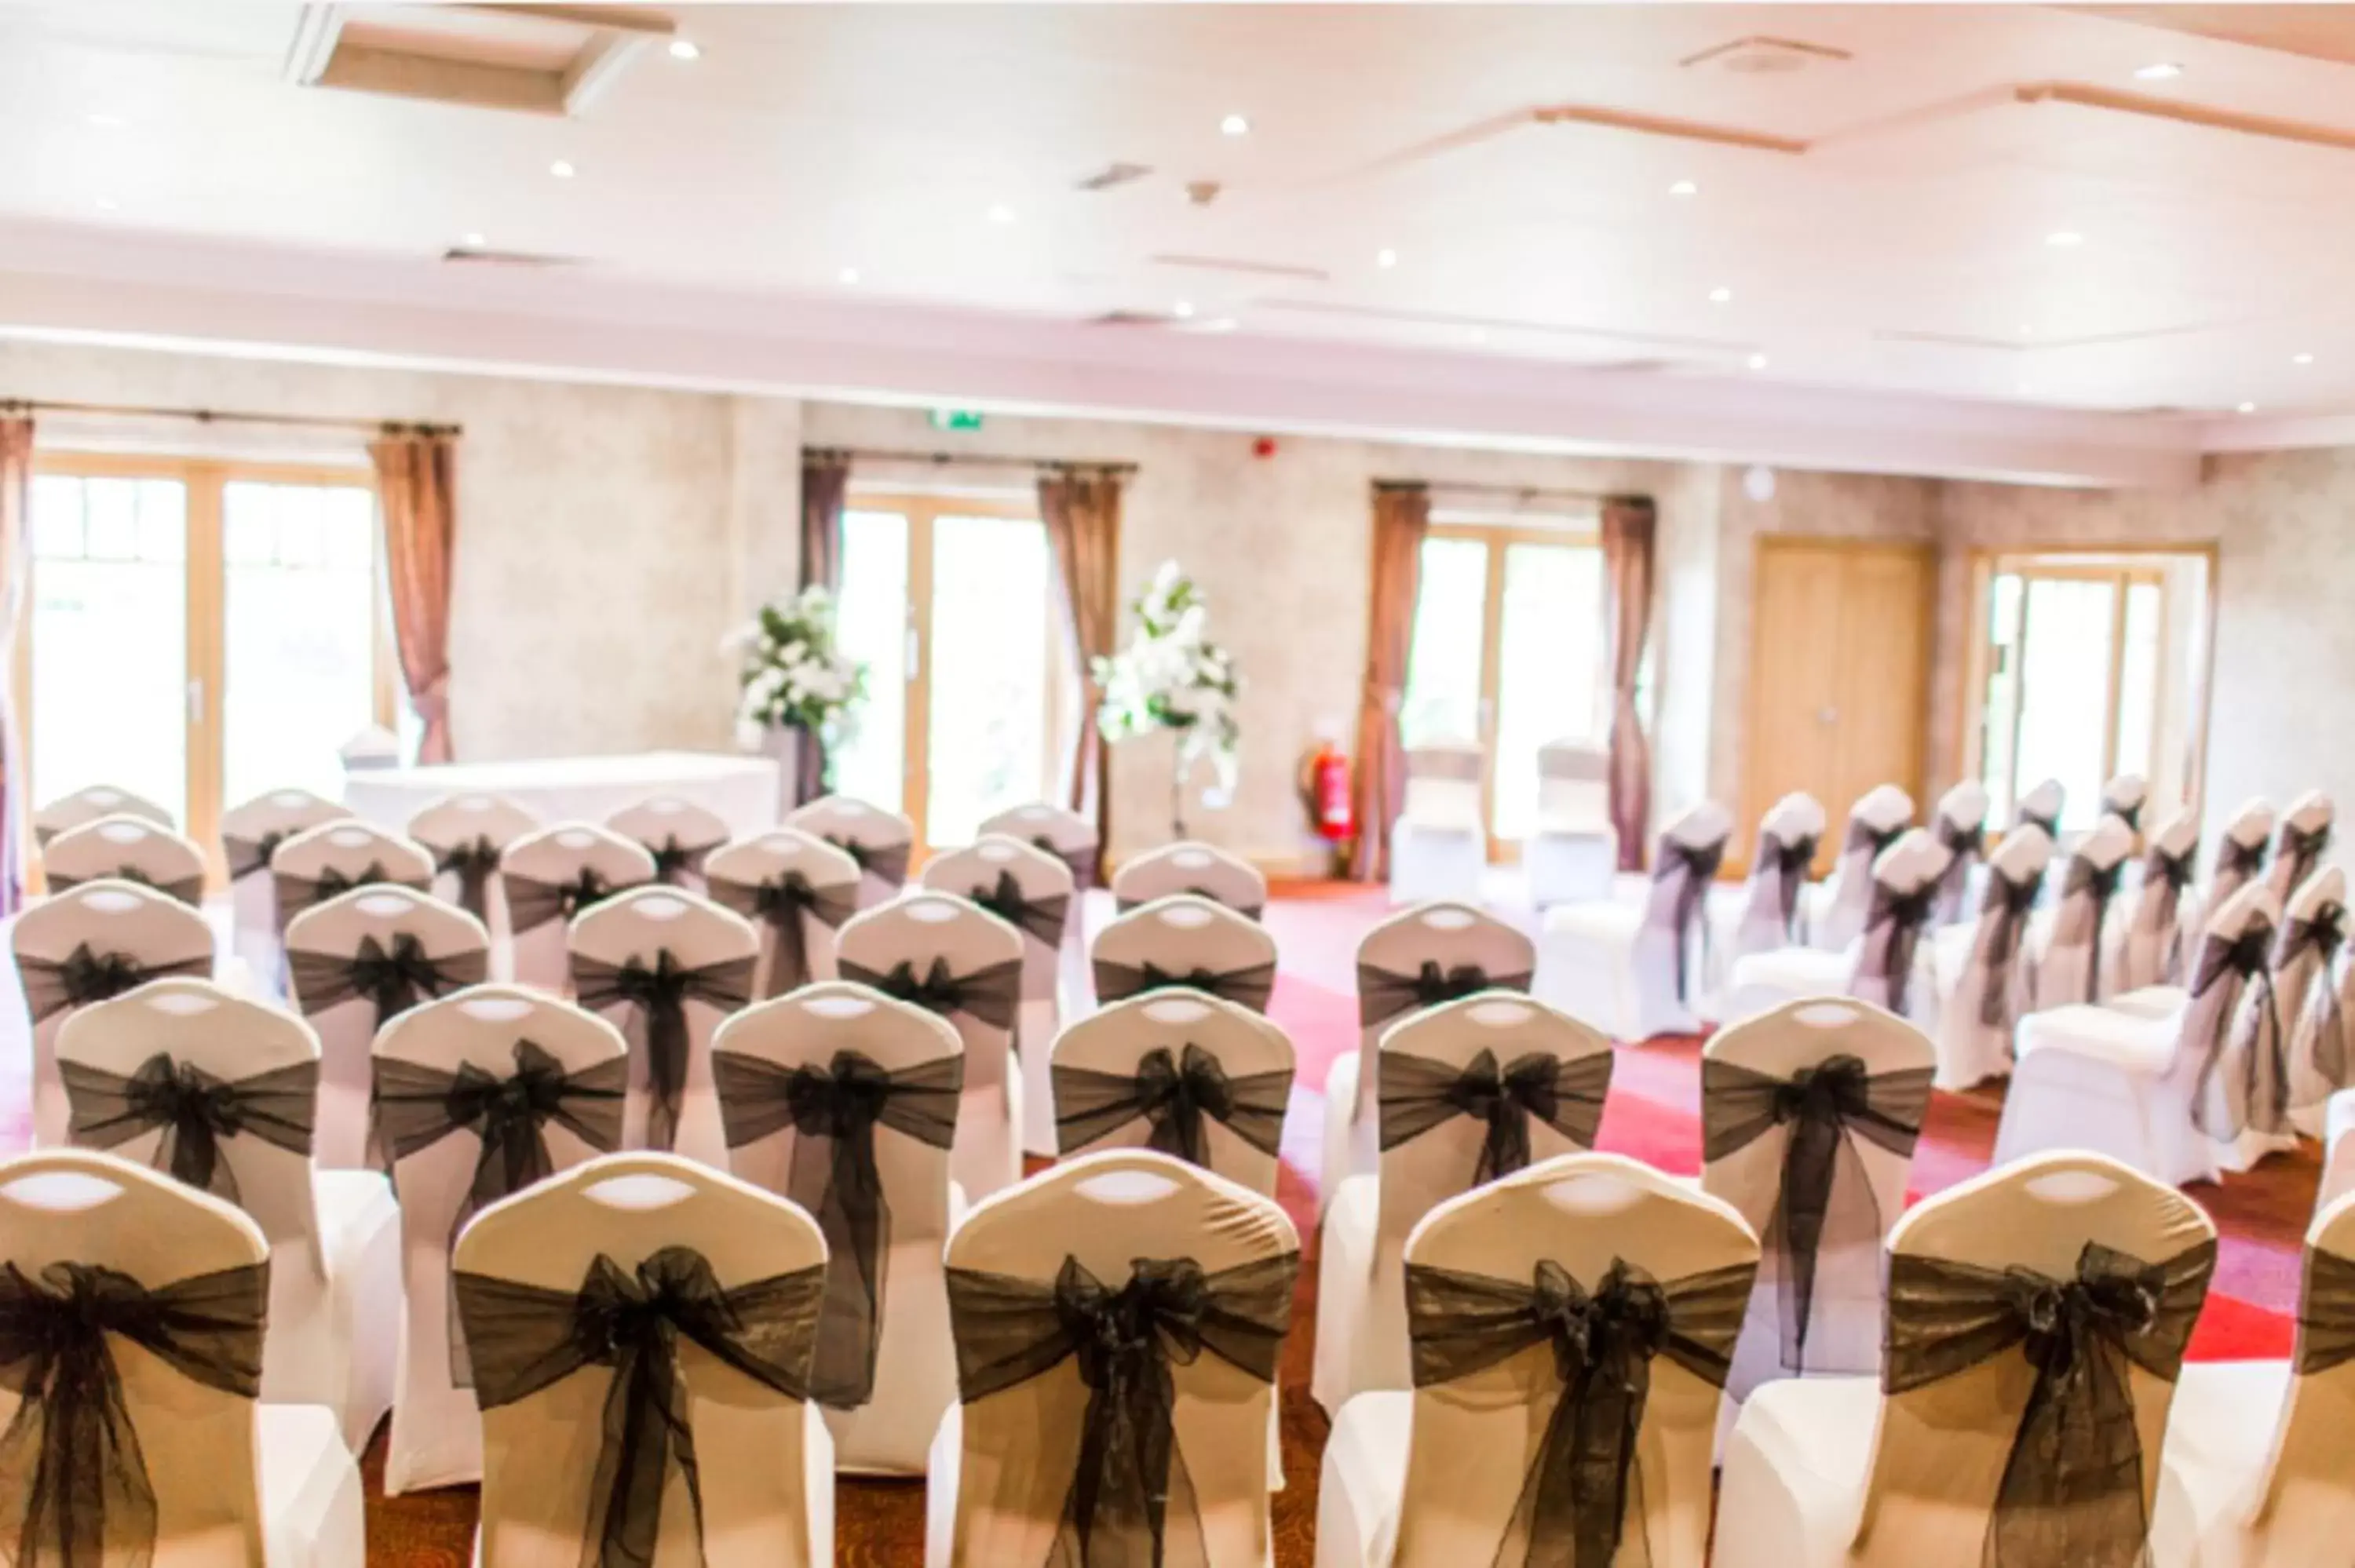 Banquet/Function facilities, Banquet Facilities in Holt Lodge Hotel